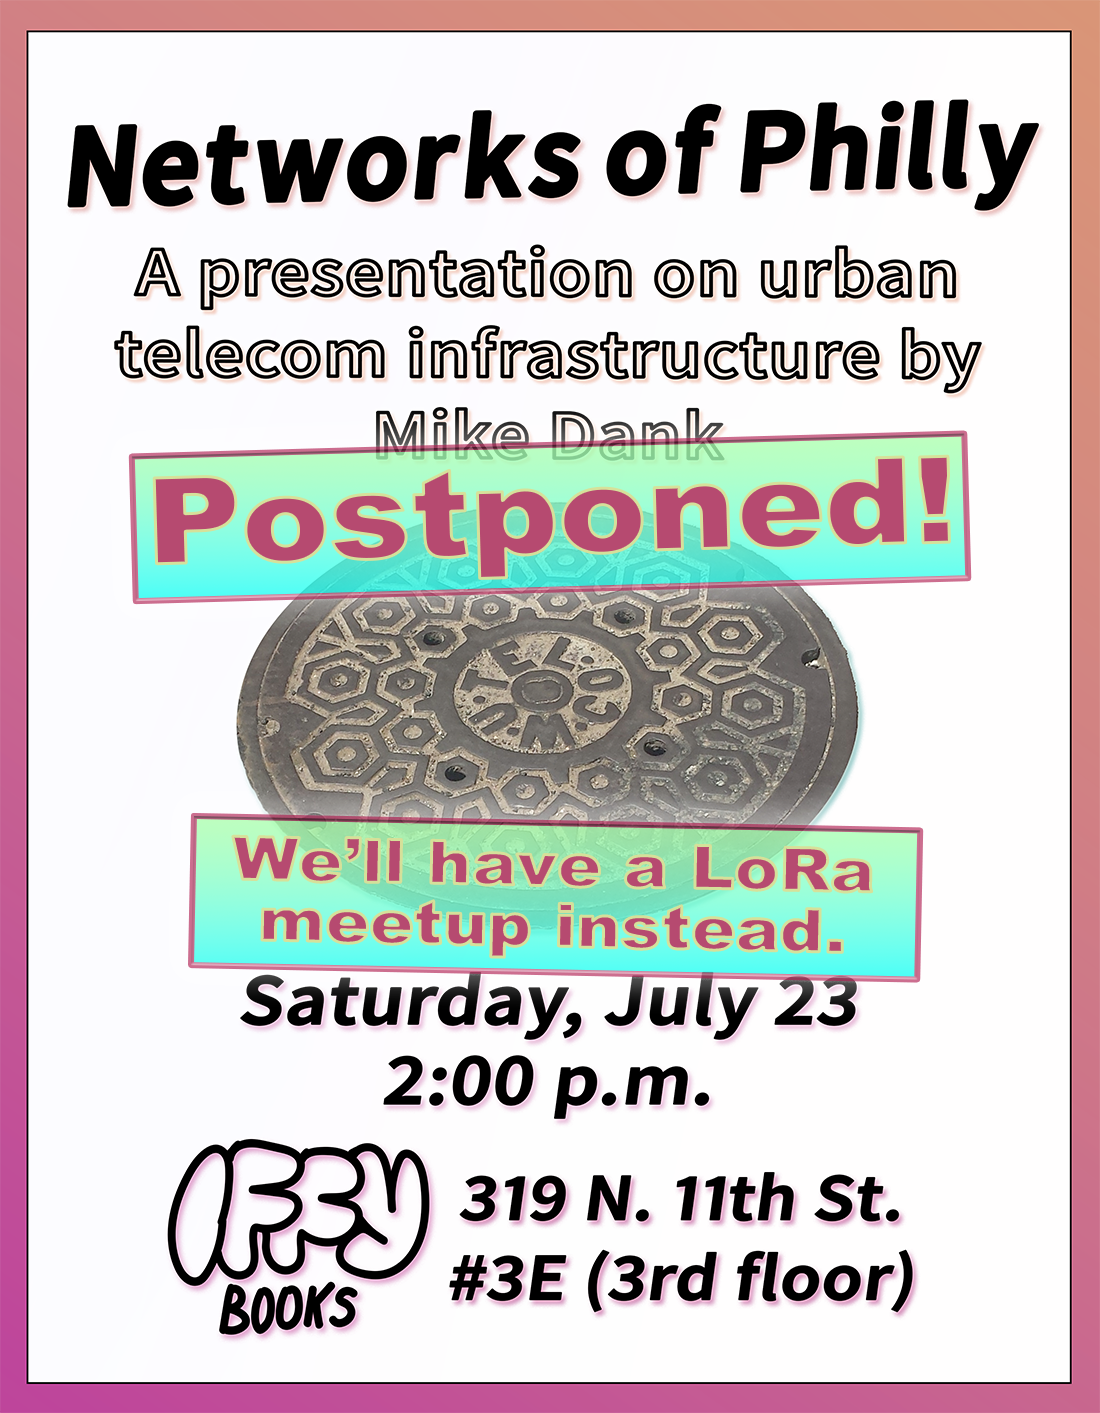 Event flyer with bars across it that say "Postponed!" and "We'll have a LoRa meetup instead." The original flyer has black sans-serif text and a pink-orange gradient around the border. The text reads "Networks of Philly / A presentation on urban telecon infrastructure by Mike Dank / Saturday, July 23 / 2:00 p.m. / Iffy Books / 319 N. 11th St. #3E (3rd floor)." In the middle of the flyer there's a manhole cover with a hexagon pattern and the inscription "W•U•Tel•Co"